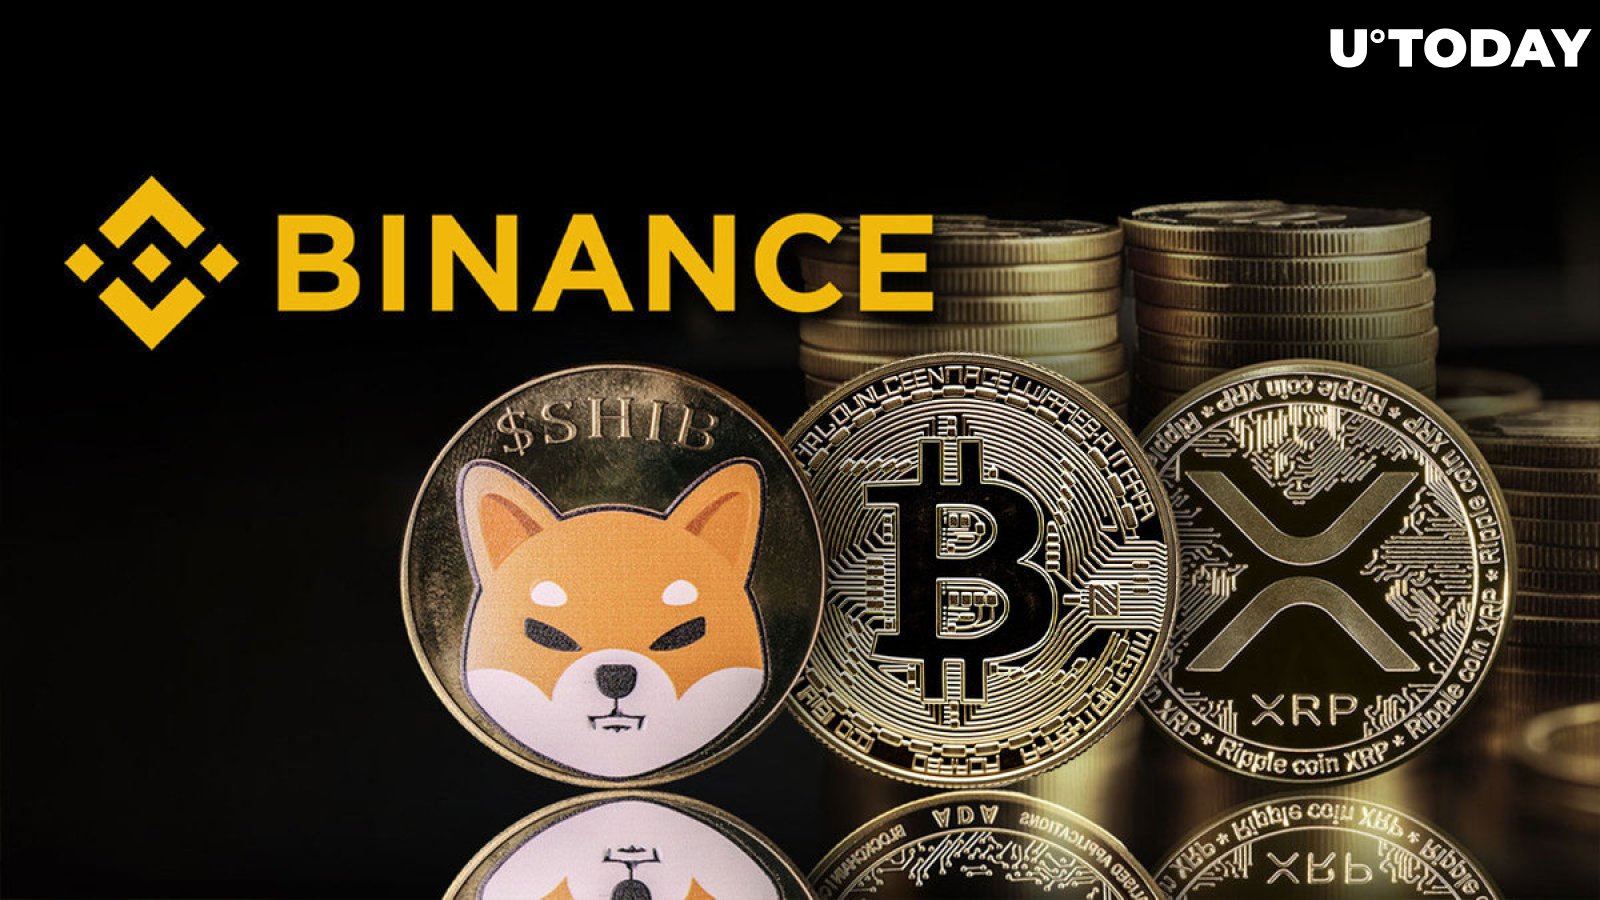 Important Updates for Binance's Users: Attention to SHIB, BTC, and XRP Holders